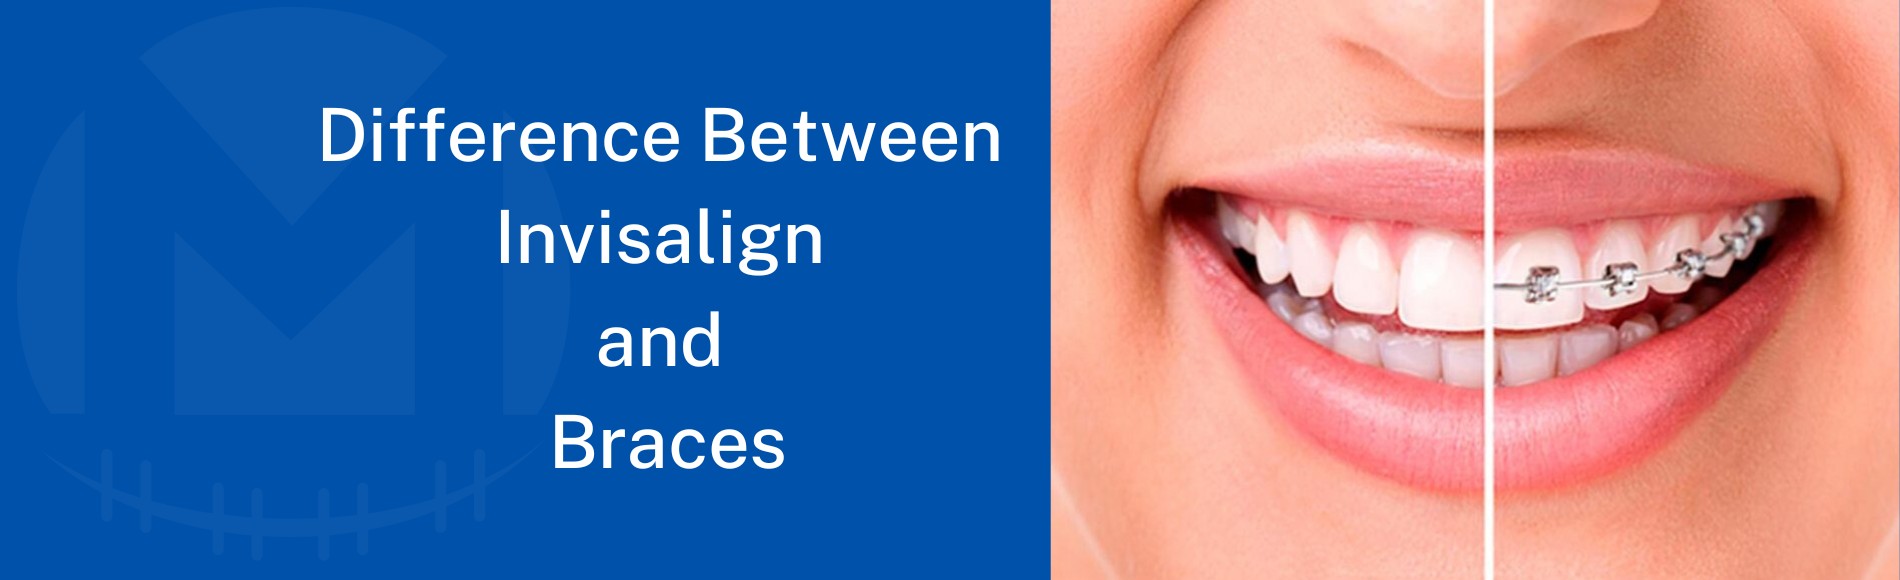 Difference Between Invisalign and Braces : Which Is Better?